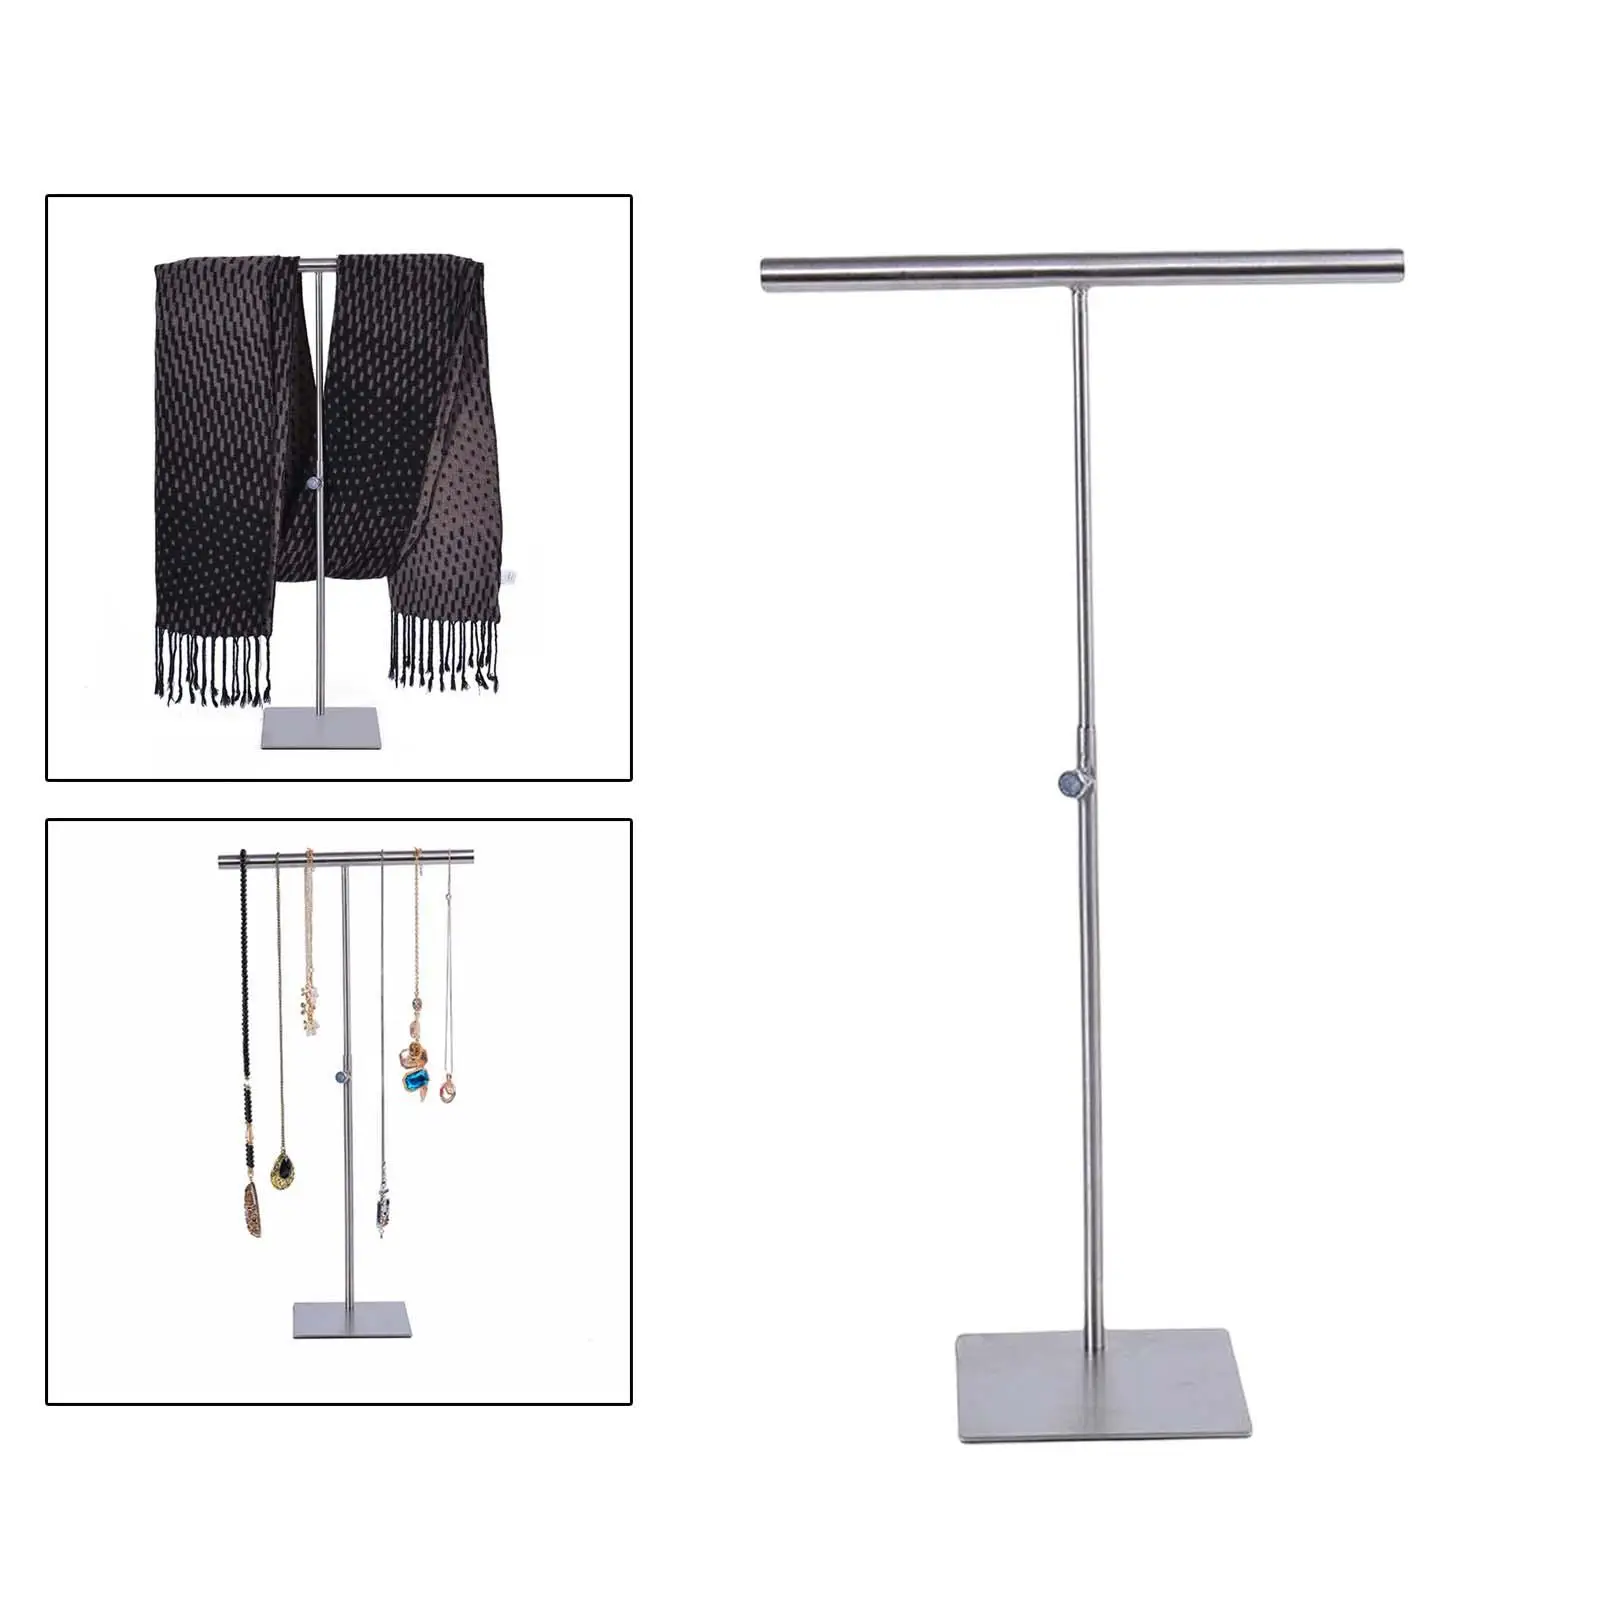 Earring Display Stainless Steel Organizer Tower Holder with Base Hanging Bar Shelf Rack Watch Necklace Earrings Scarf